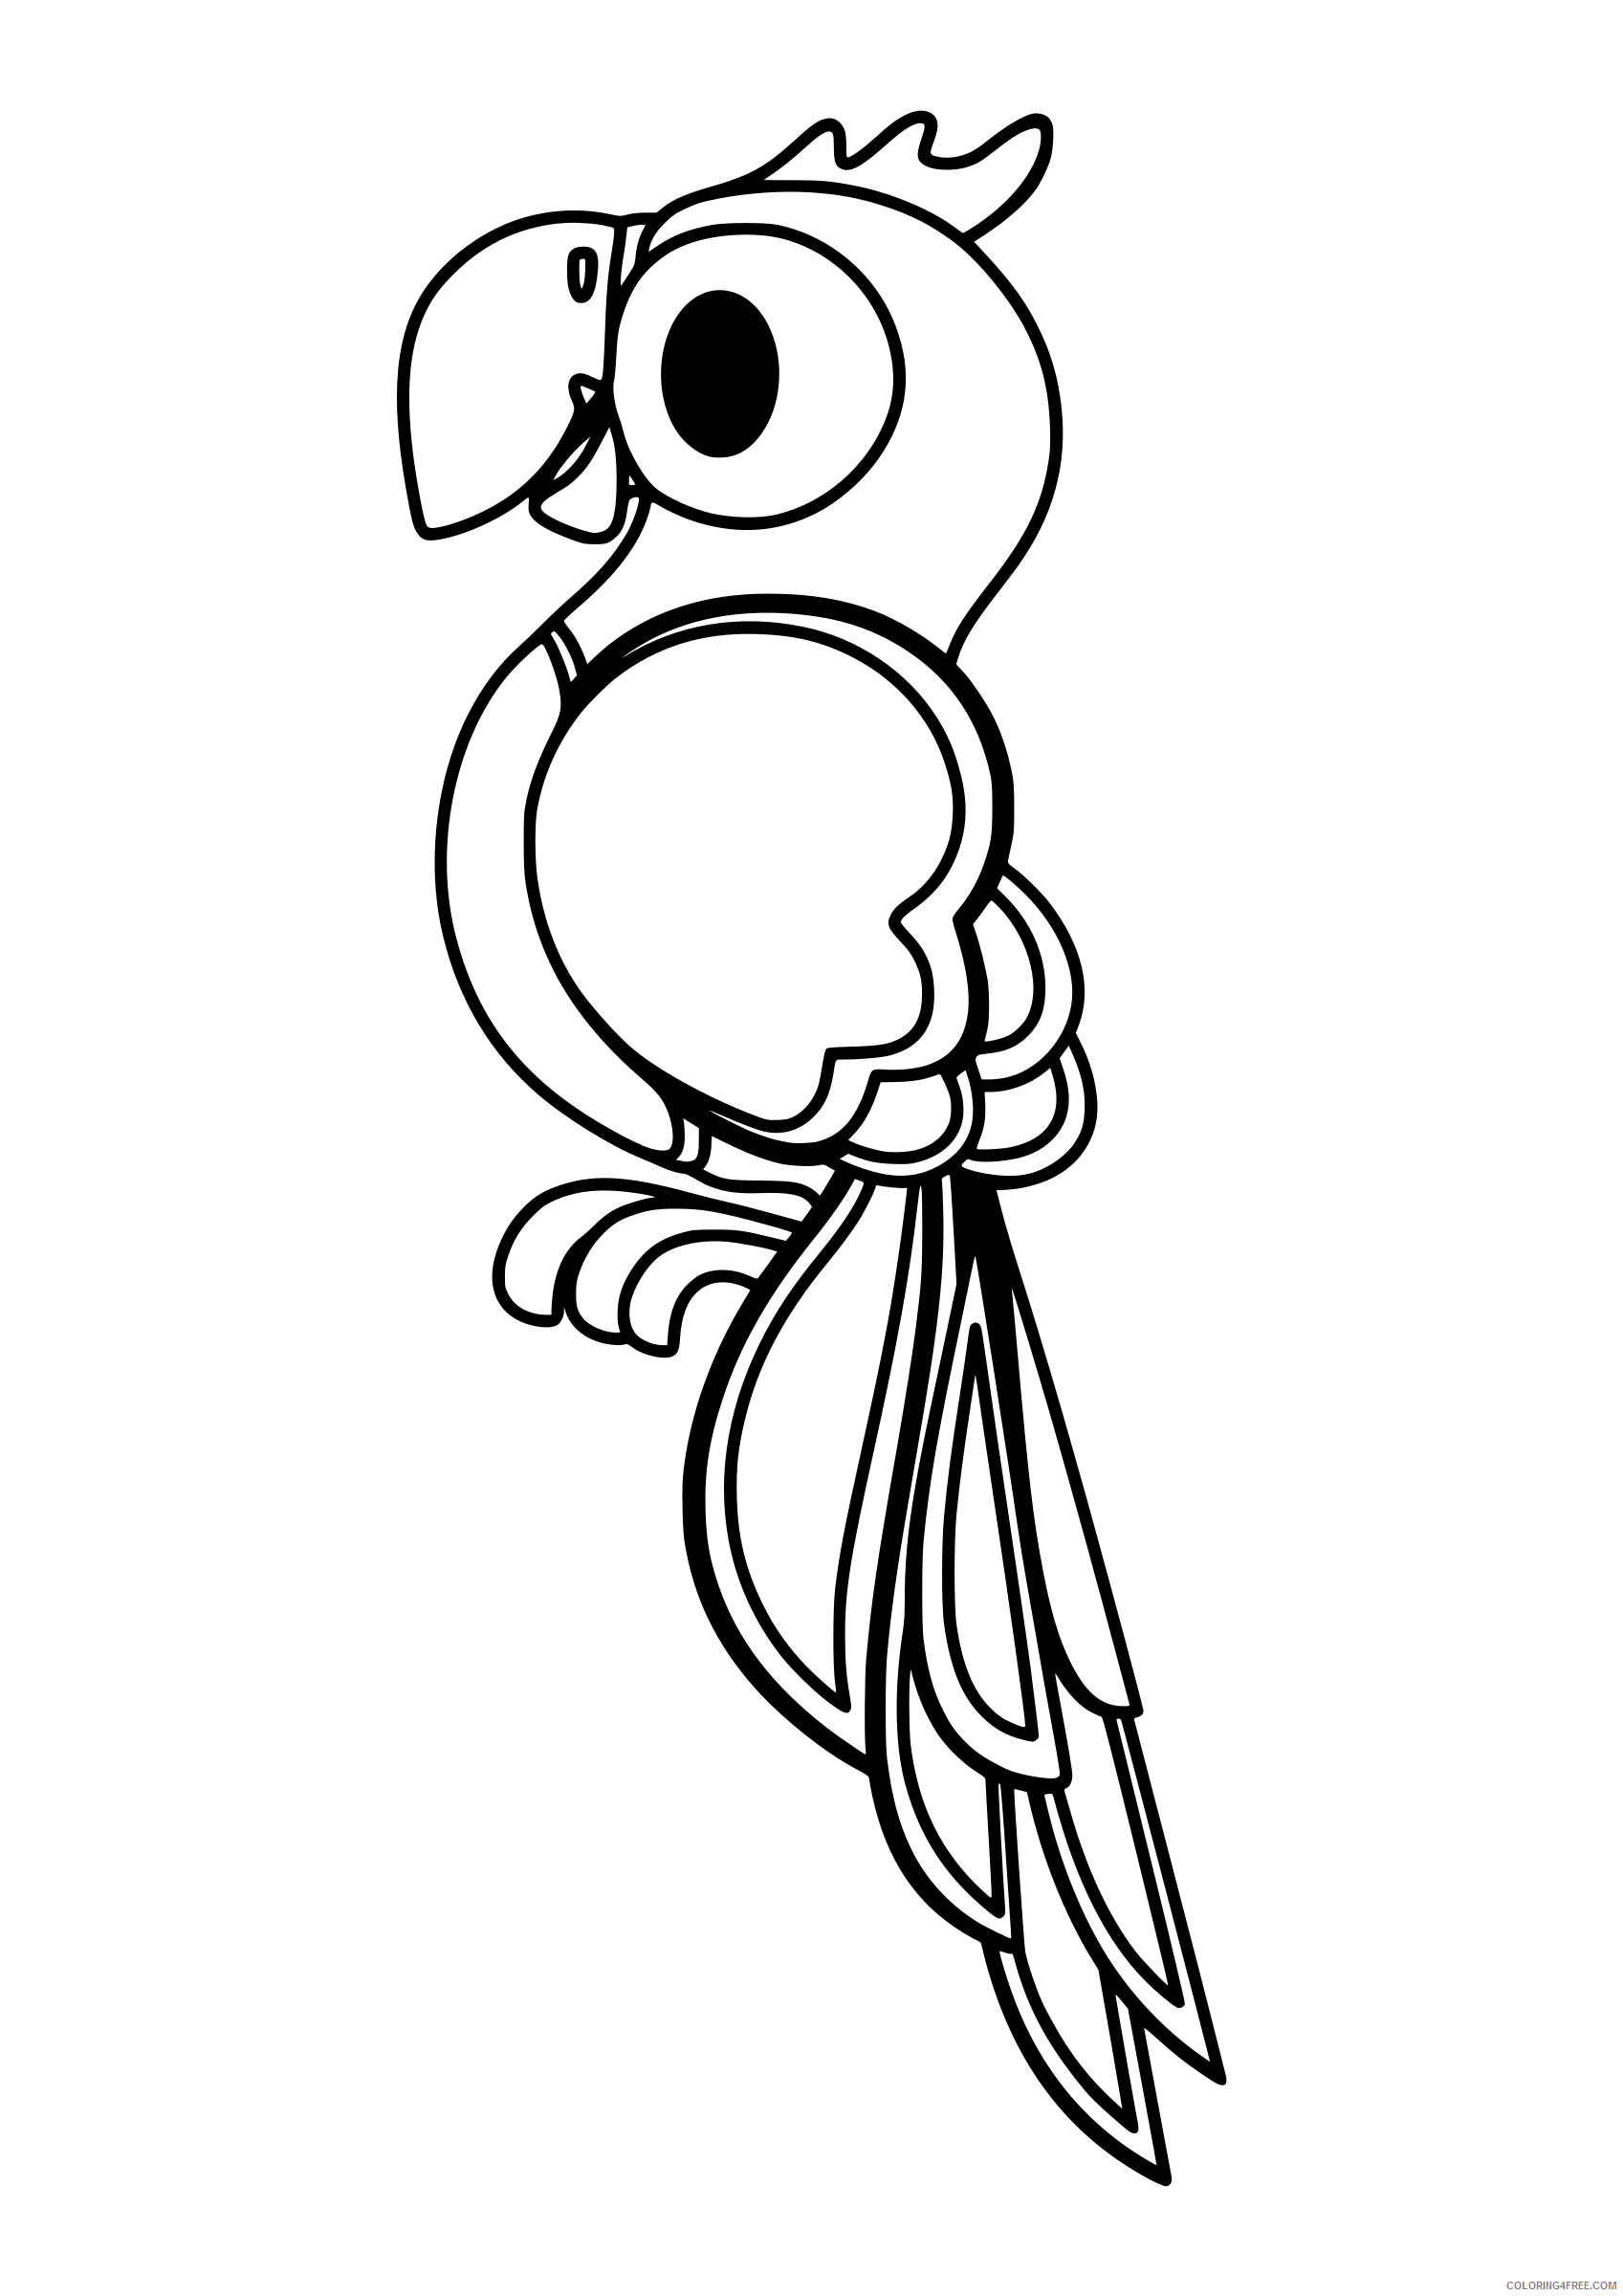 Parrot Coloring Pages parrot colouring book remix request Printable Coloring4free